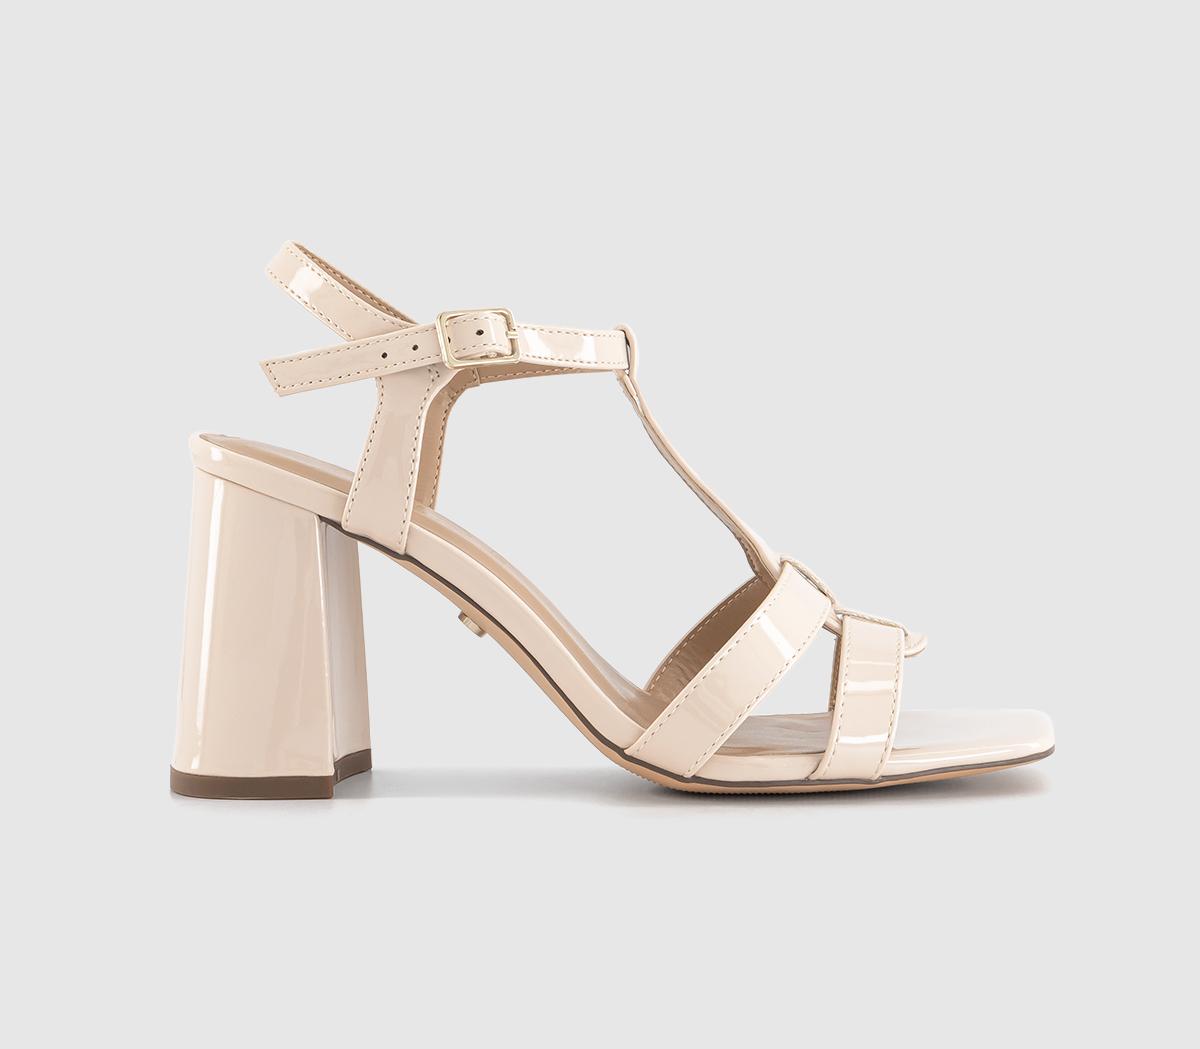 Halo Tbar Heeled Sandals White Patent